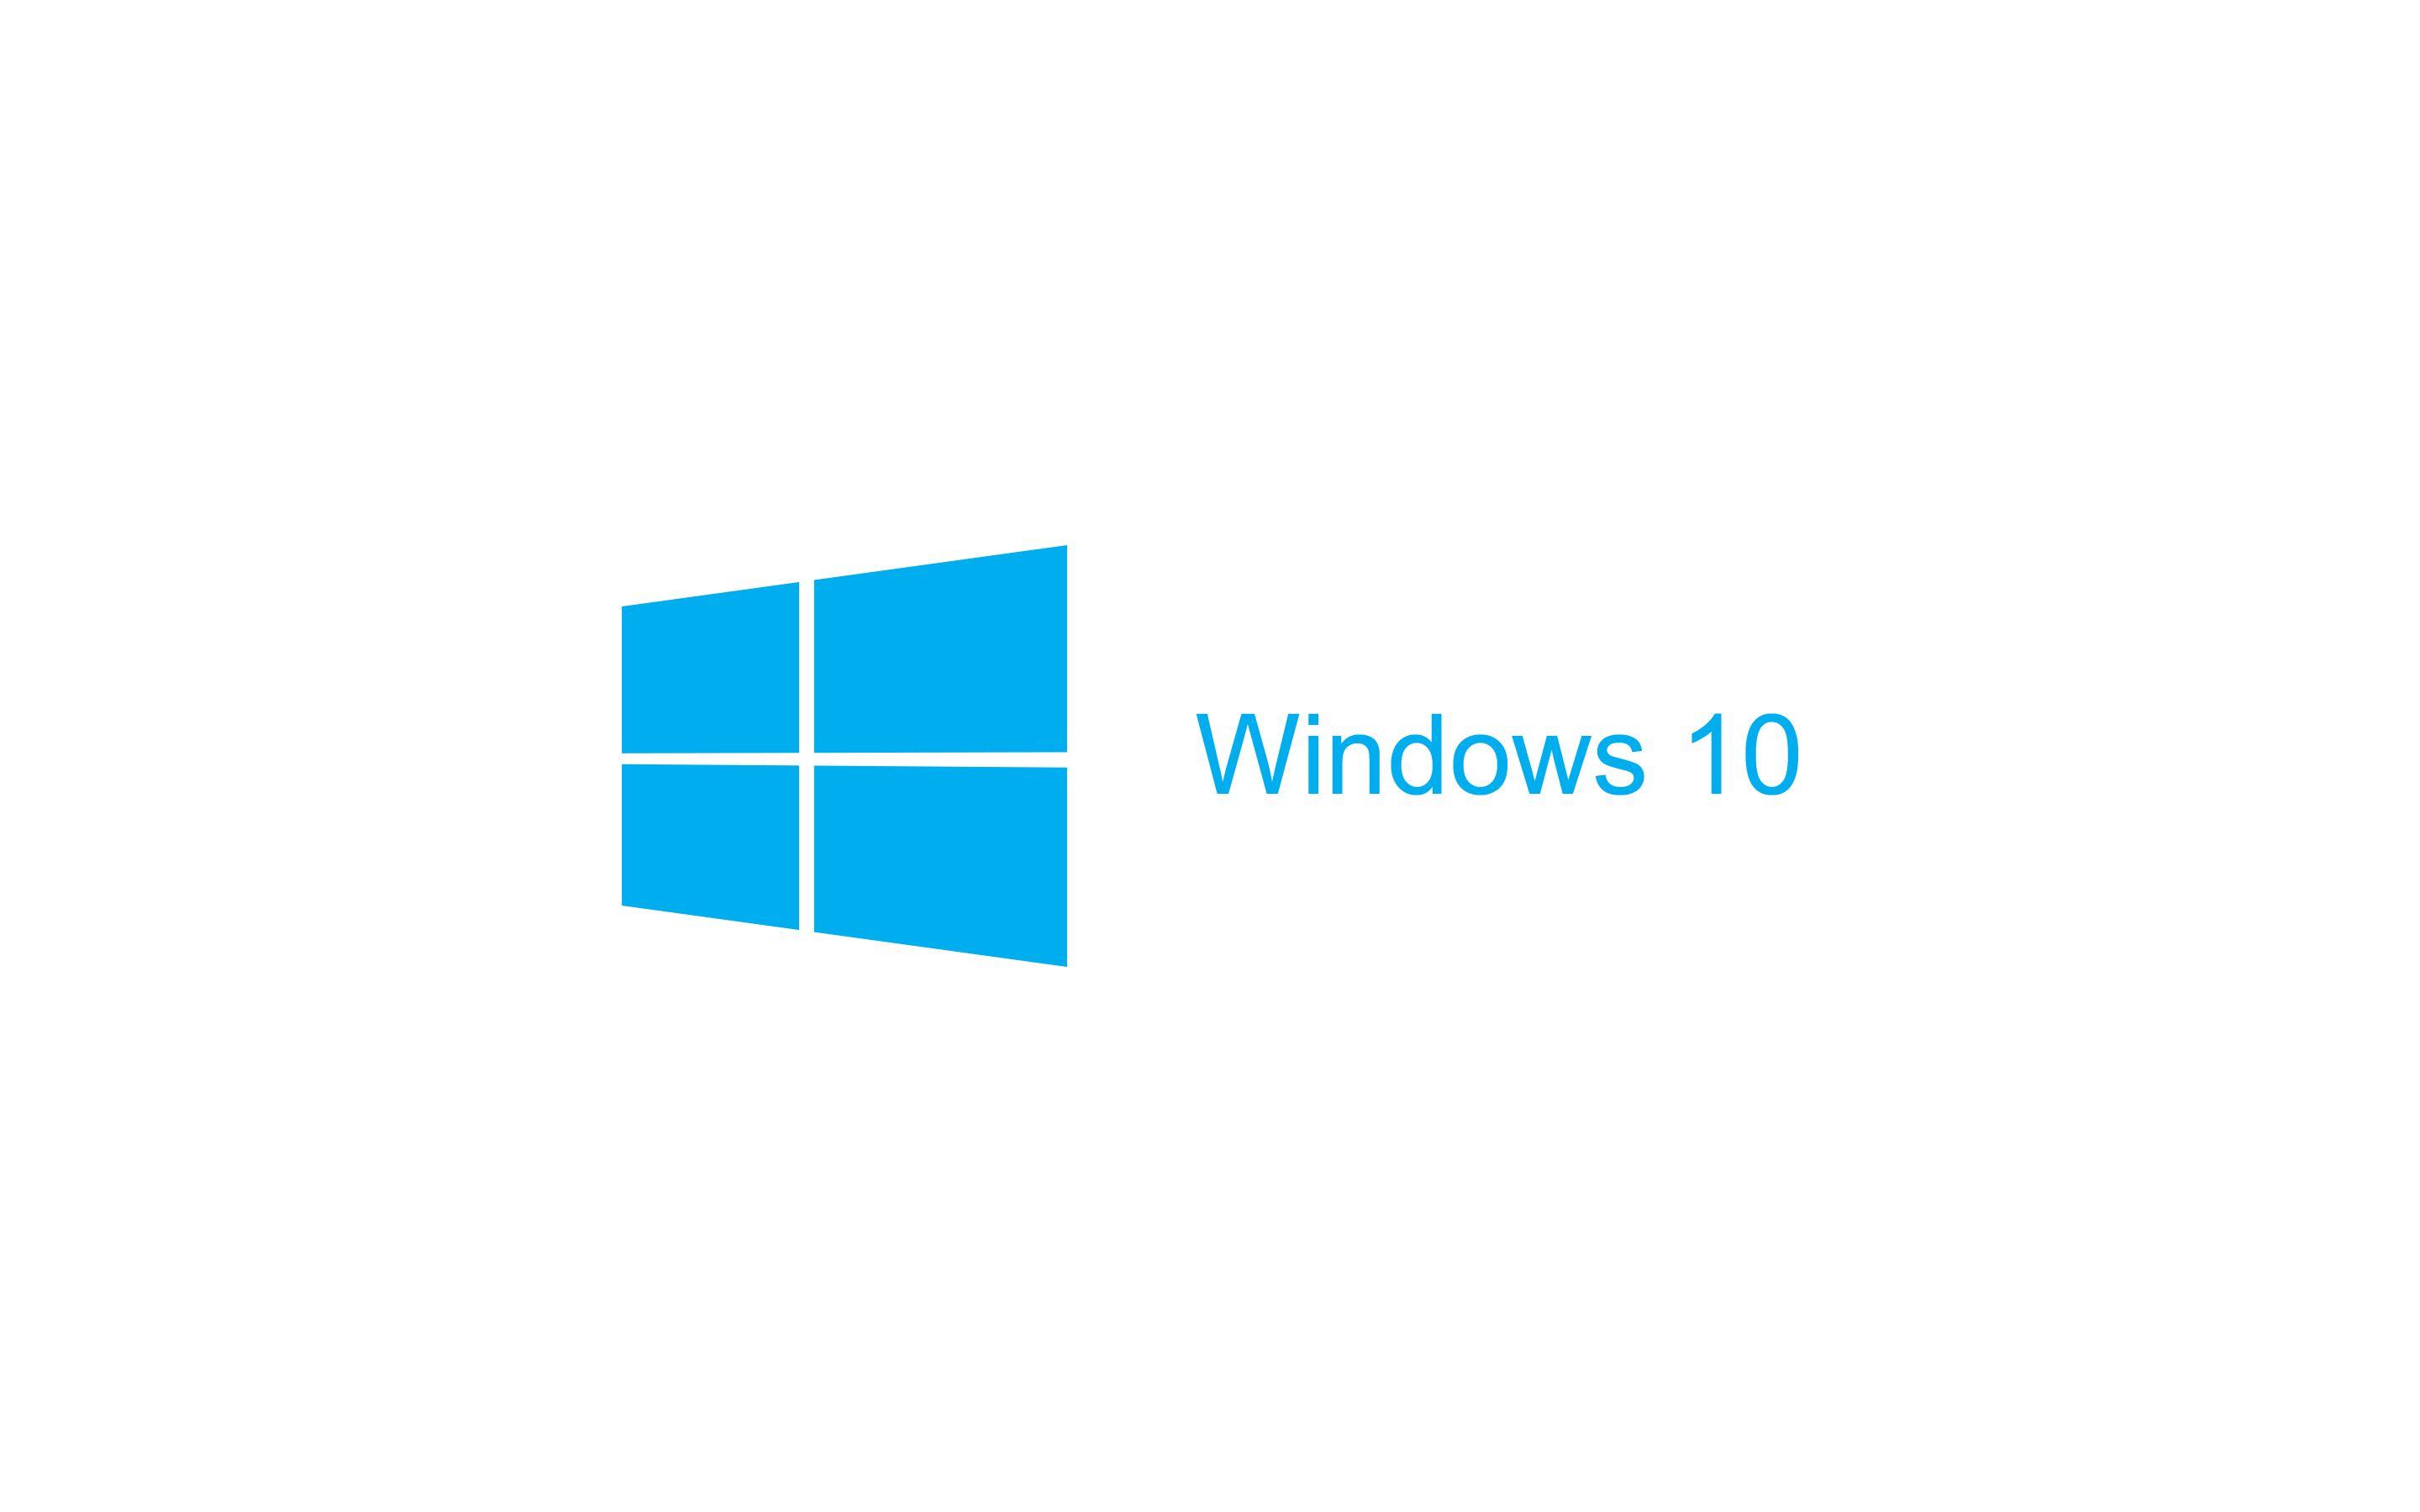 Official Microsoft Windows 10 Logo - Microsoft Windows 10 - seven questions answered AD Network Solutions